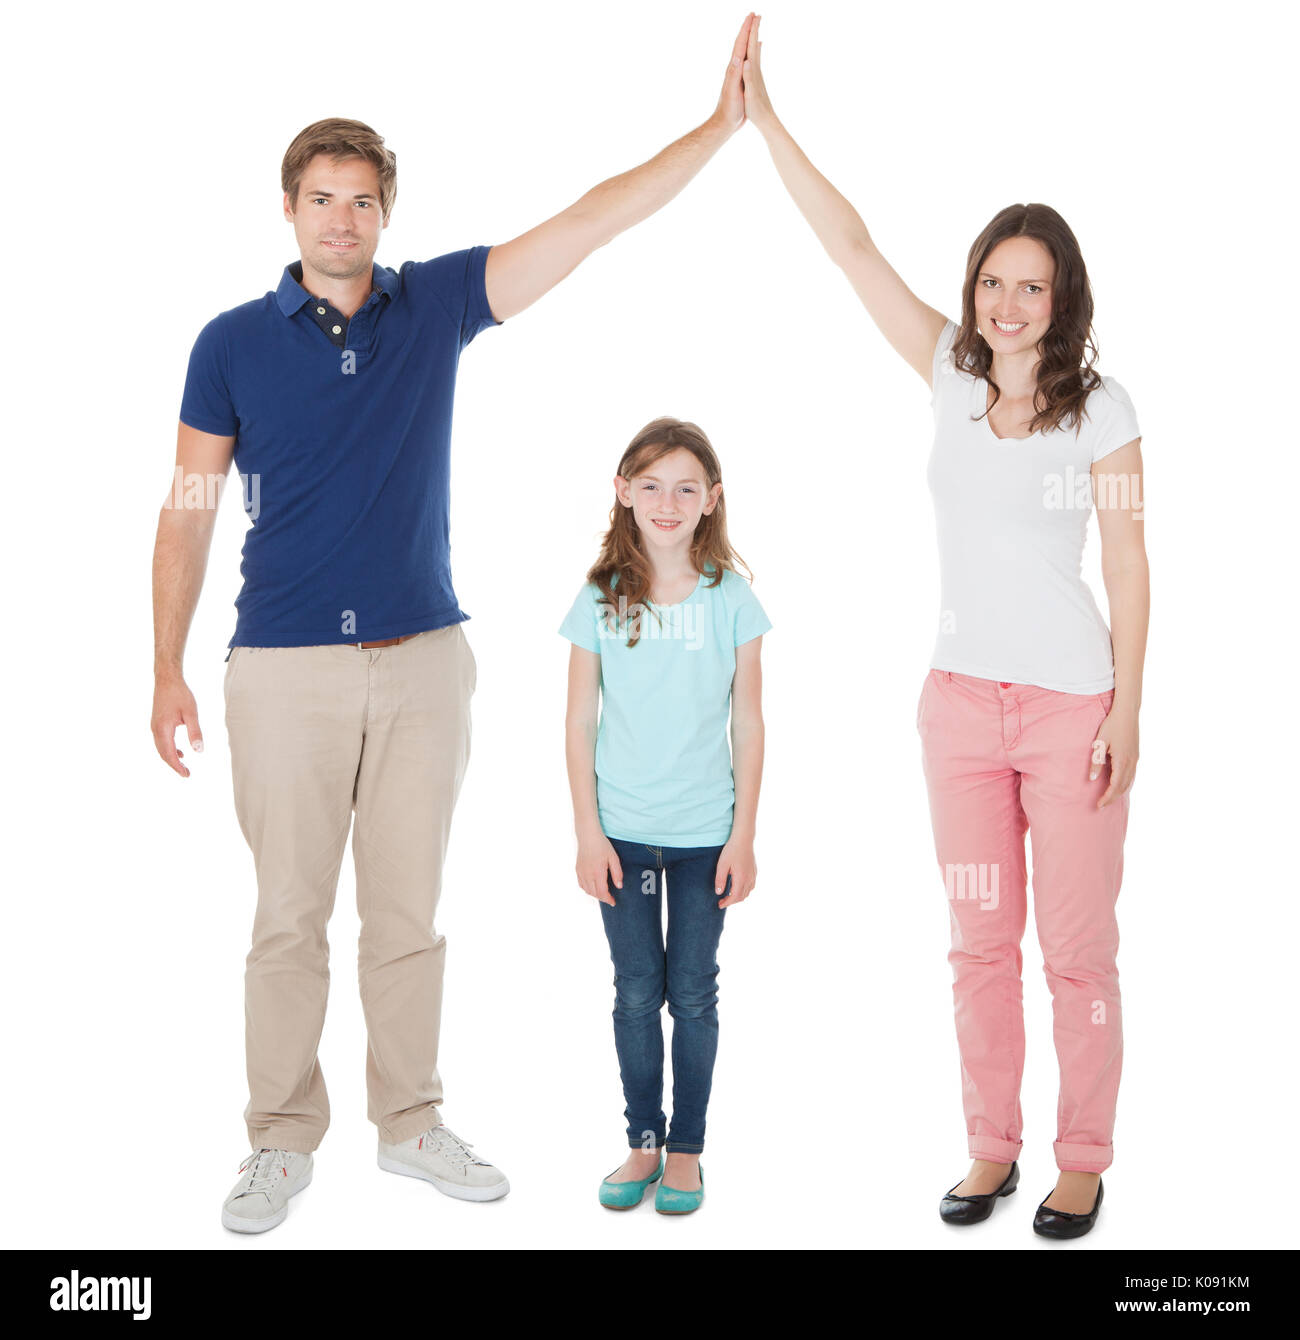 Full length portrait of parents forming house roof shape above daughter over white background Stock Photo